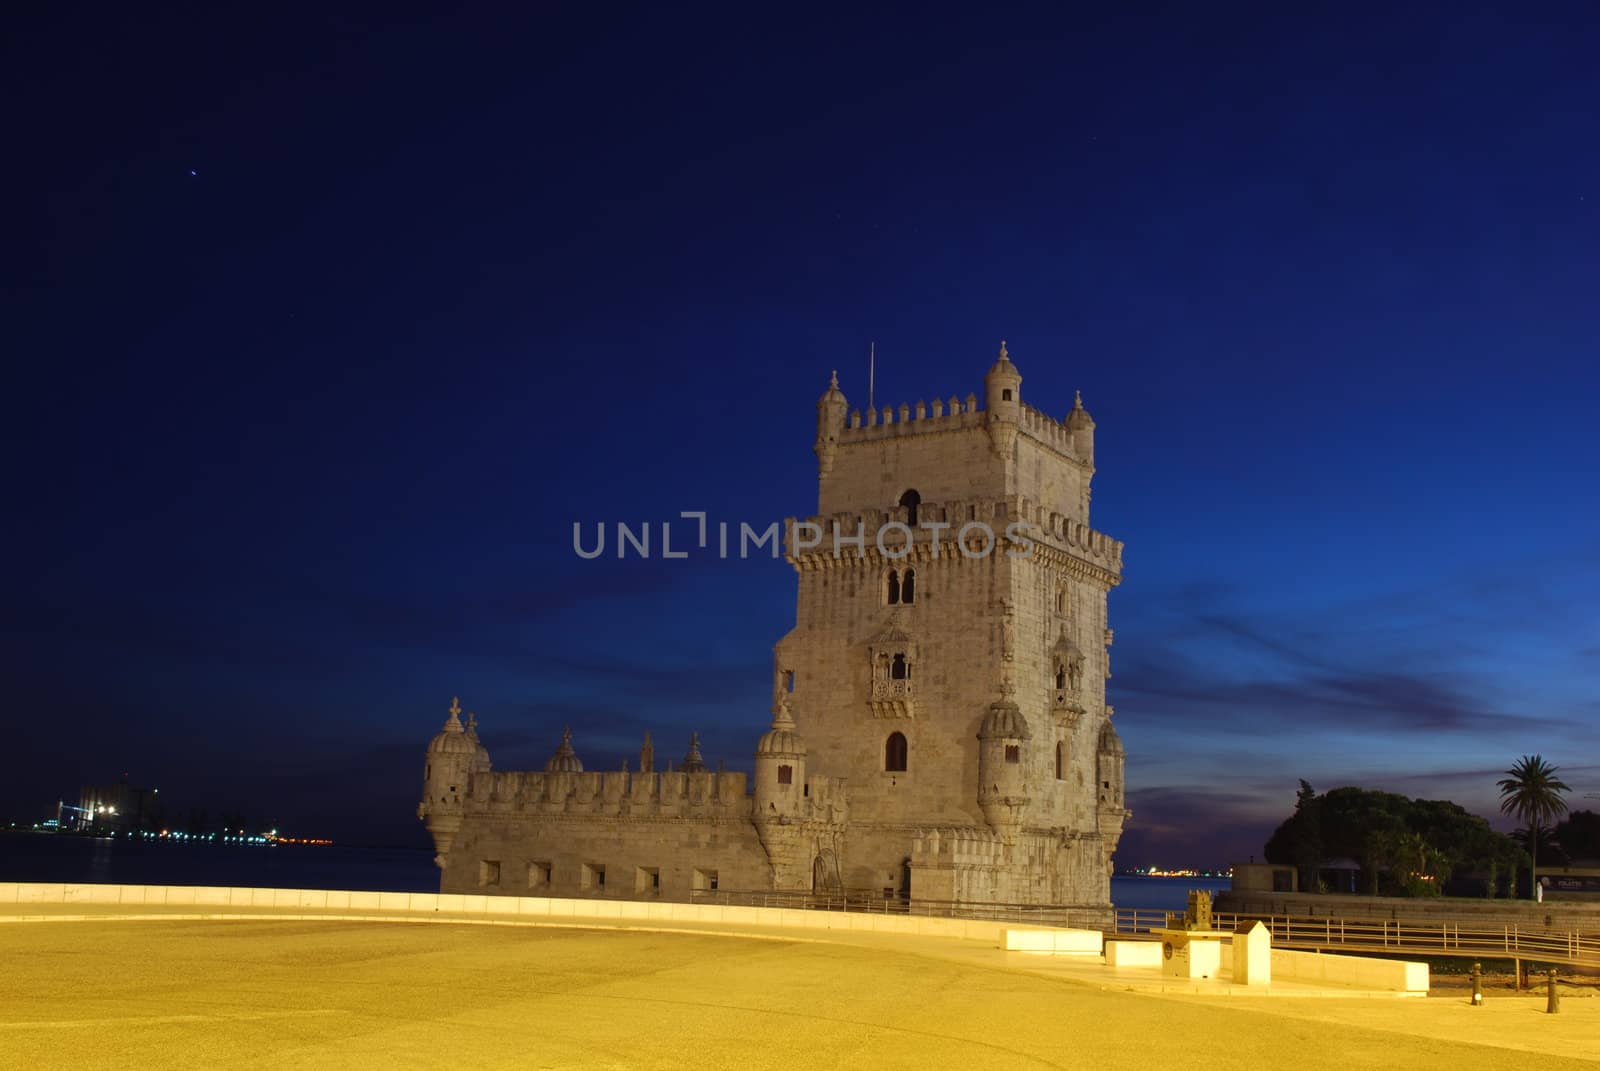 the most famous monument in the city of Lisbon